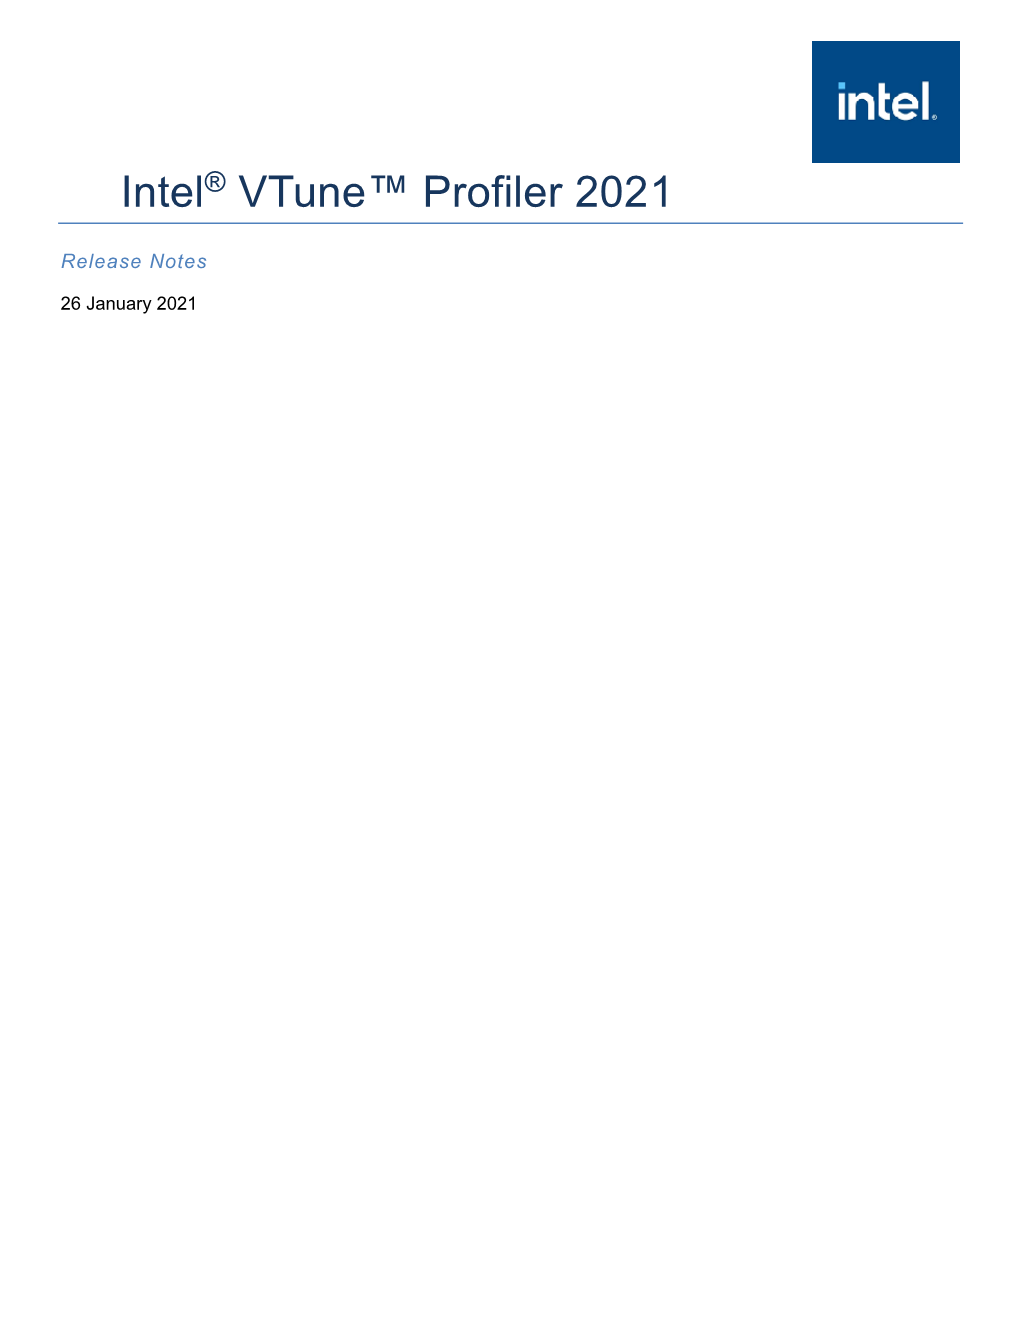 Intel® Vtune™ Profiler 2021 Release Notes Intel® Vtune™ Profiler 2021 2 What’S New Detailed New Features